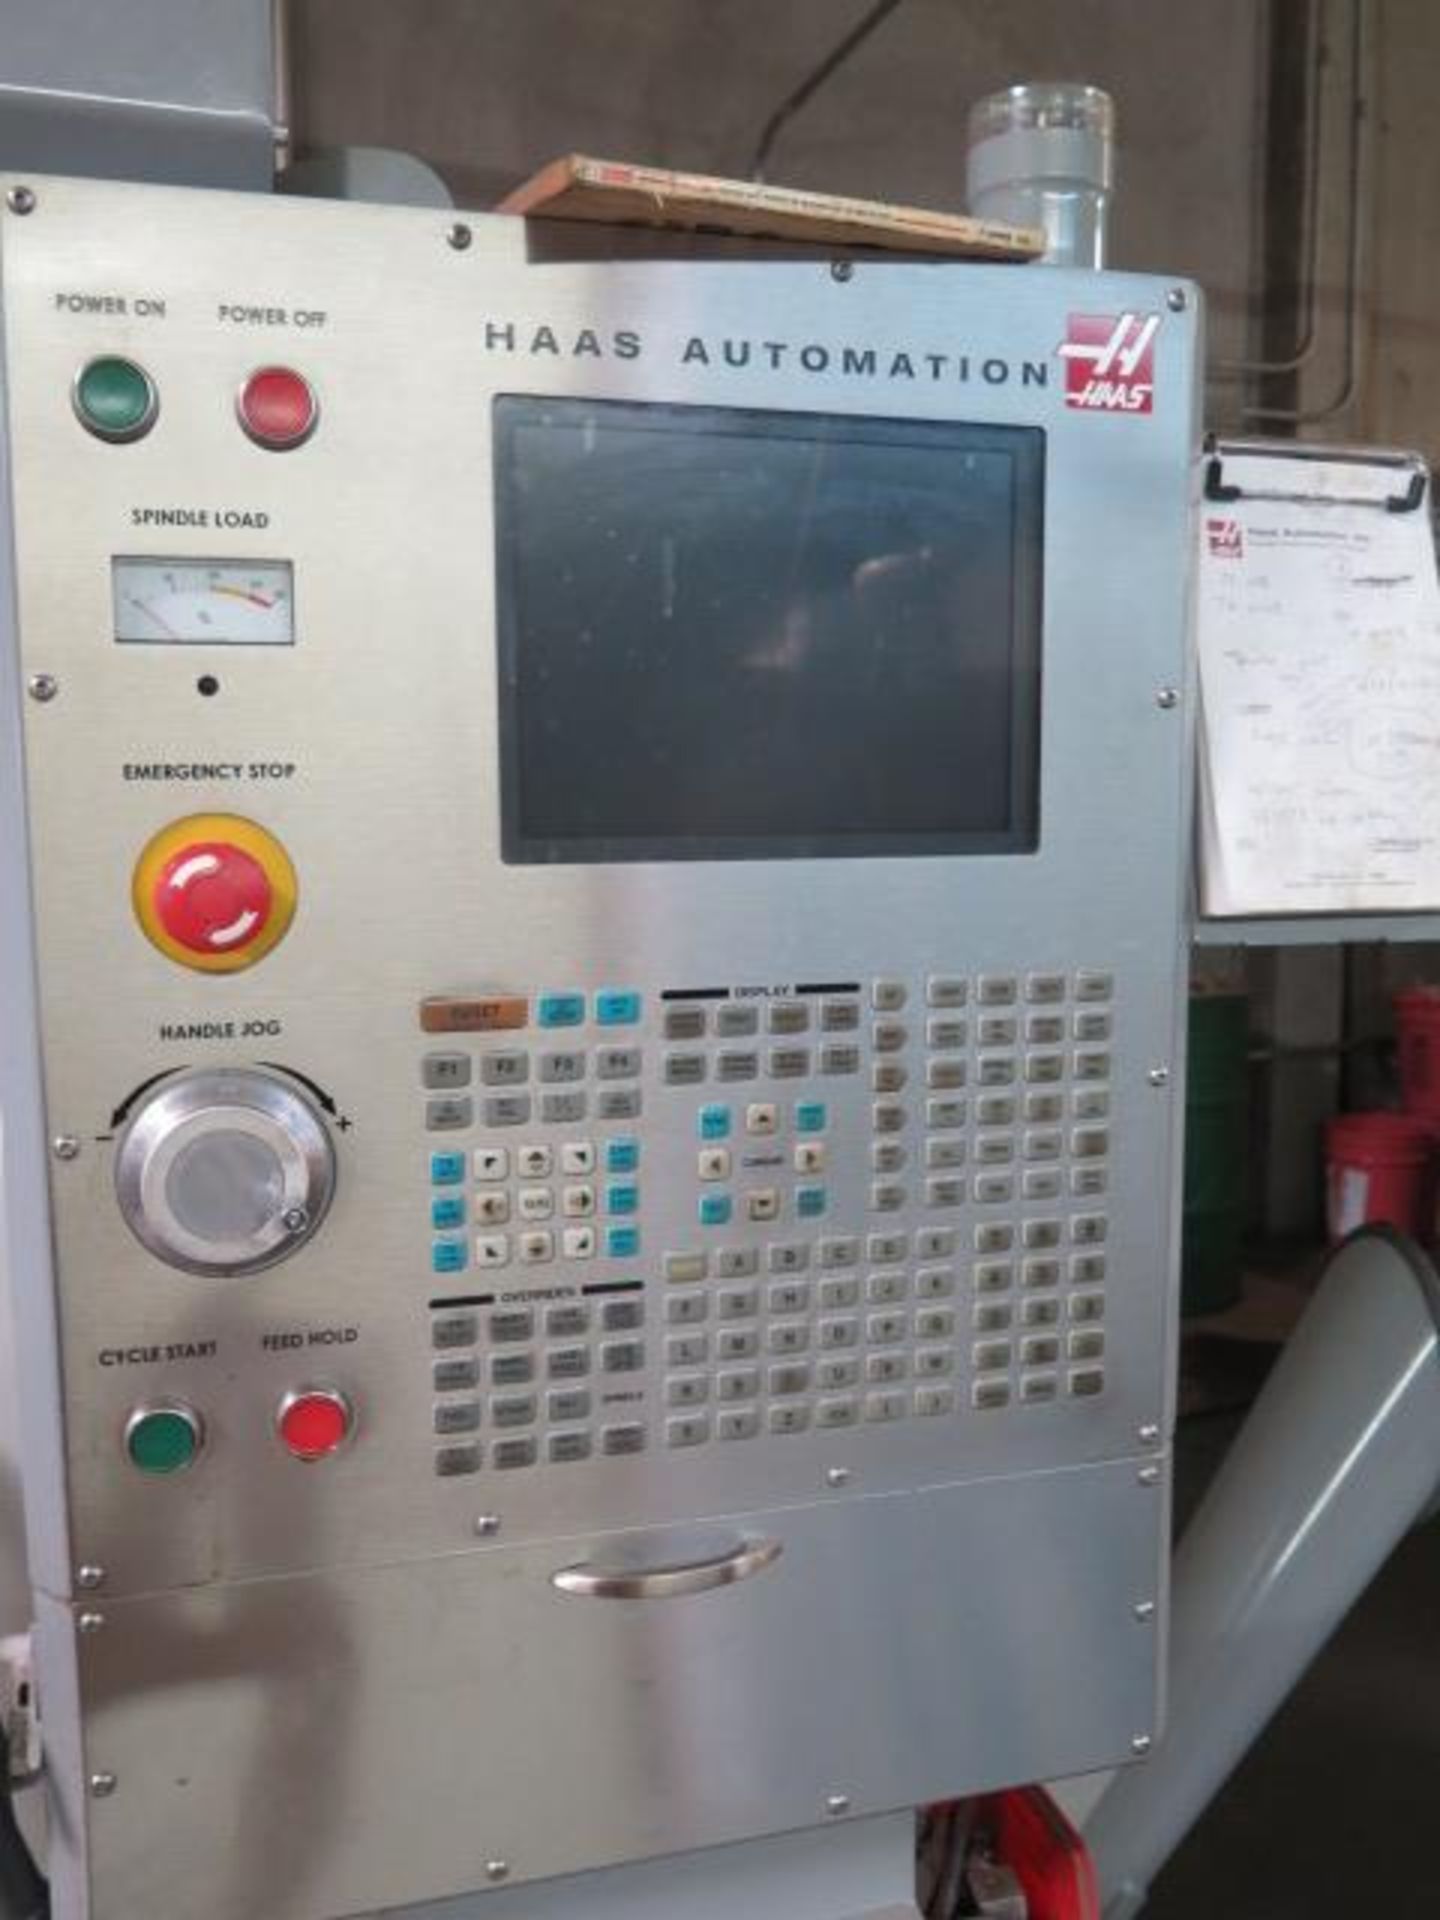 2006 Haas SL-20 CNC Turning Center s/n 73236 w/ Haas Controls, Tool Presetter, 10-Station Turret, - Image 5 of 17